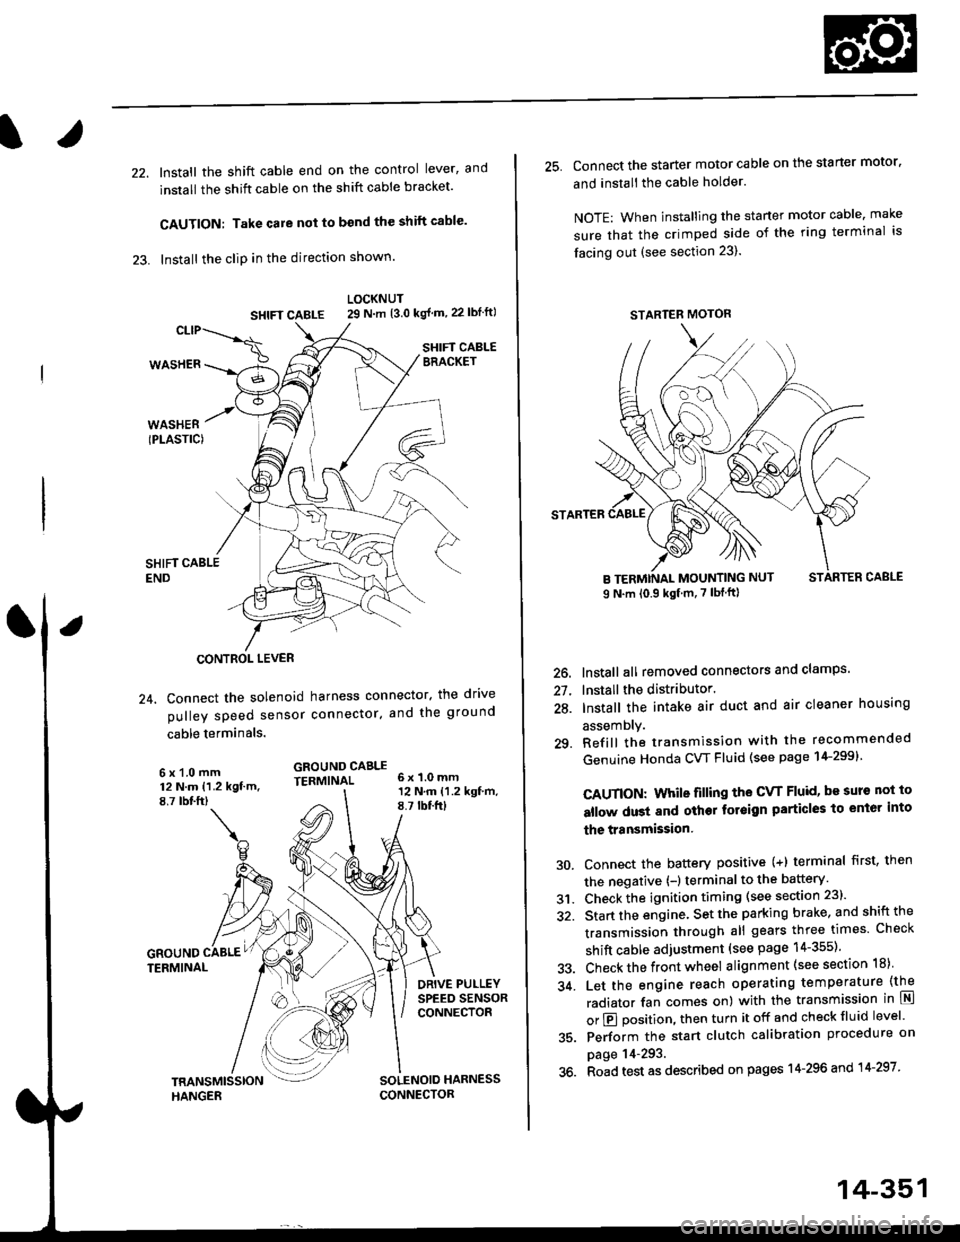 HONDA CIVIC 1996 6.G User Guide 22. Install the shift cable end on the control lever, and
install the shift cable on the shift cable bracket
CAUTION: Take care not to bend the shift cable
23. lnstall the clip in the direction show